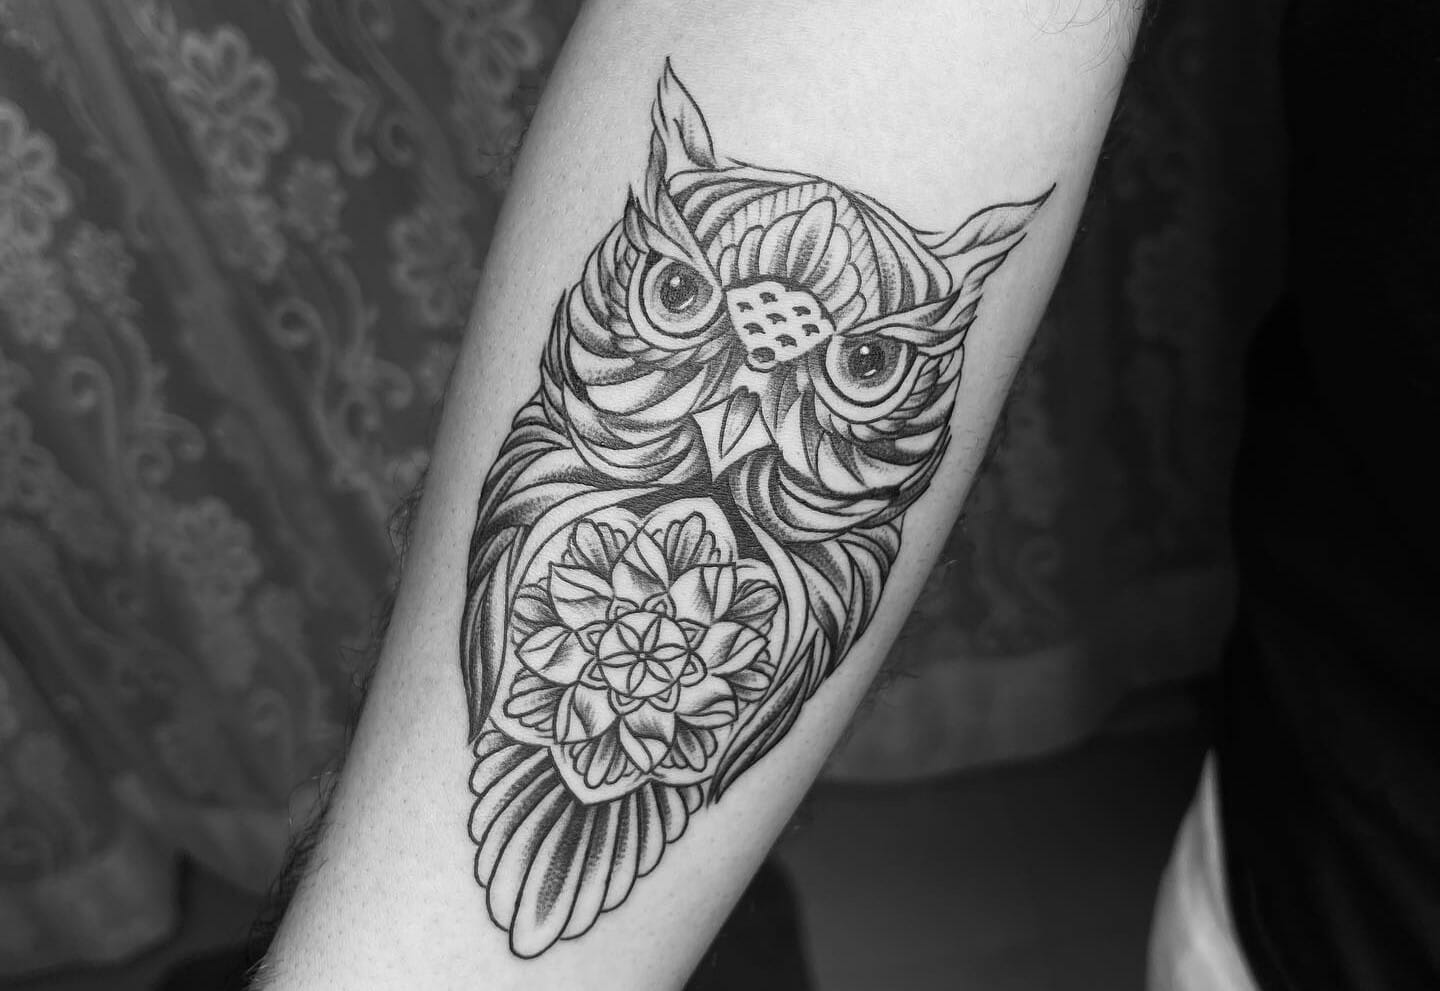 110 Best Owl Tattoos Ideas with Images | Cool forearm tattoos, Forearm  tattoos, Forearm tattoo design